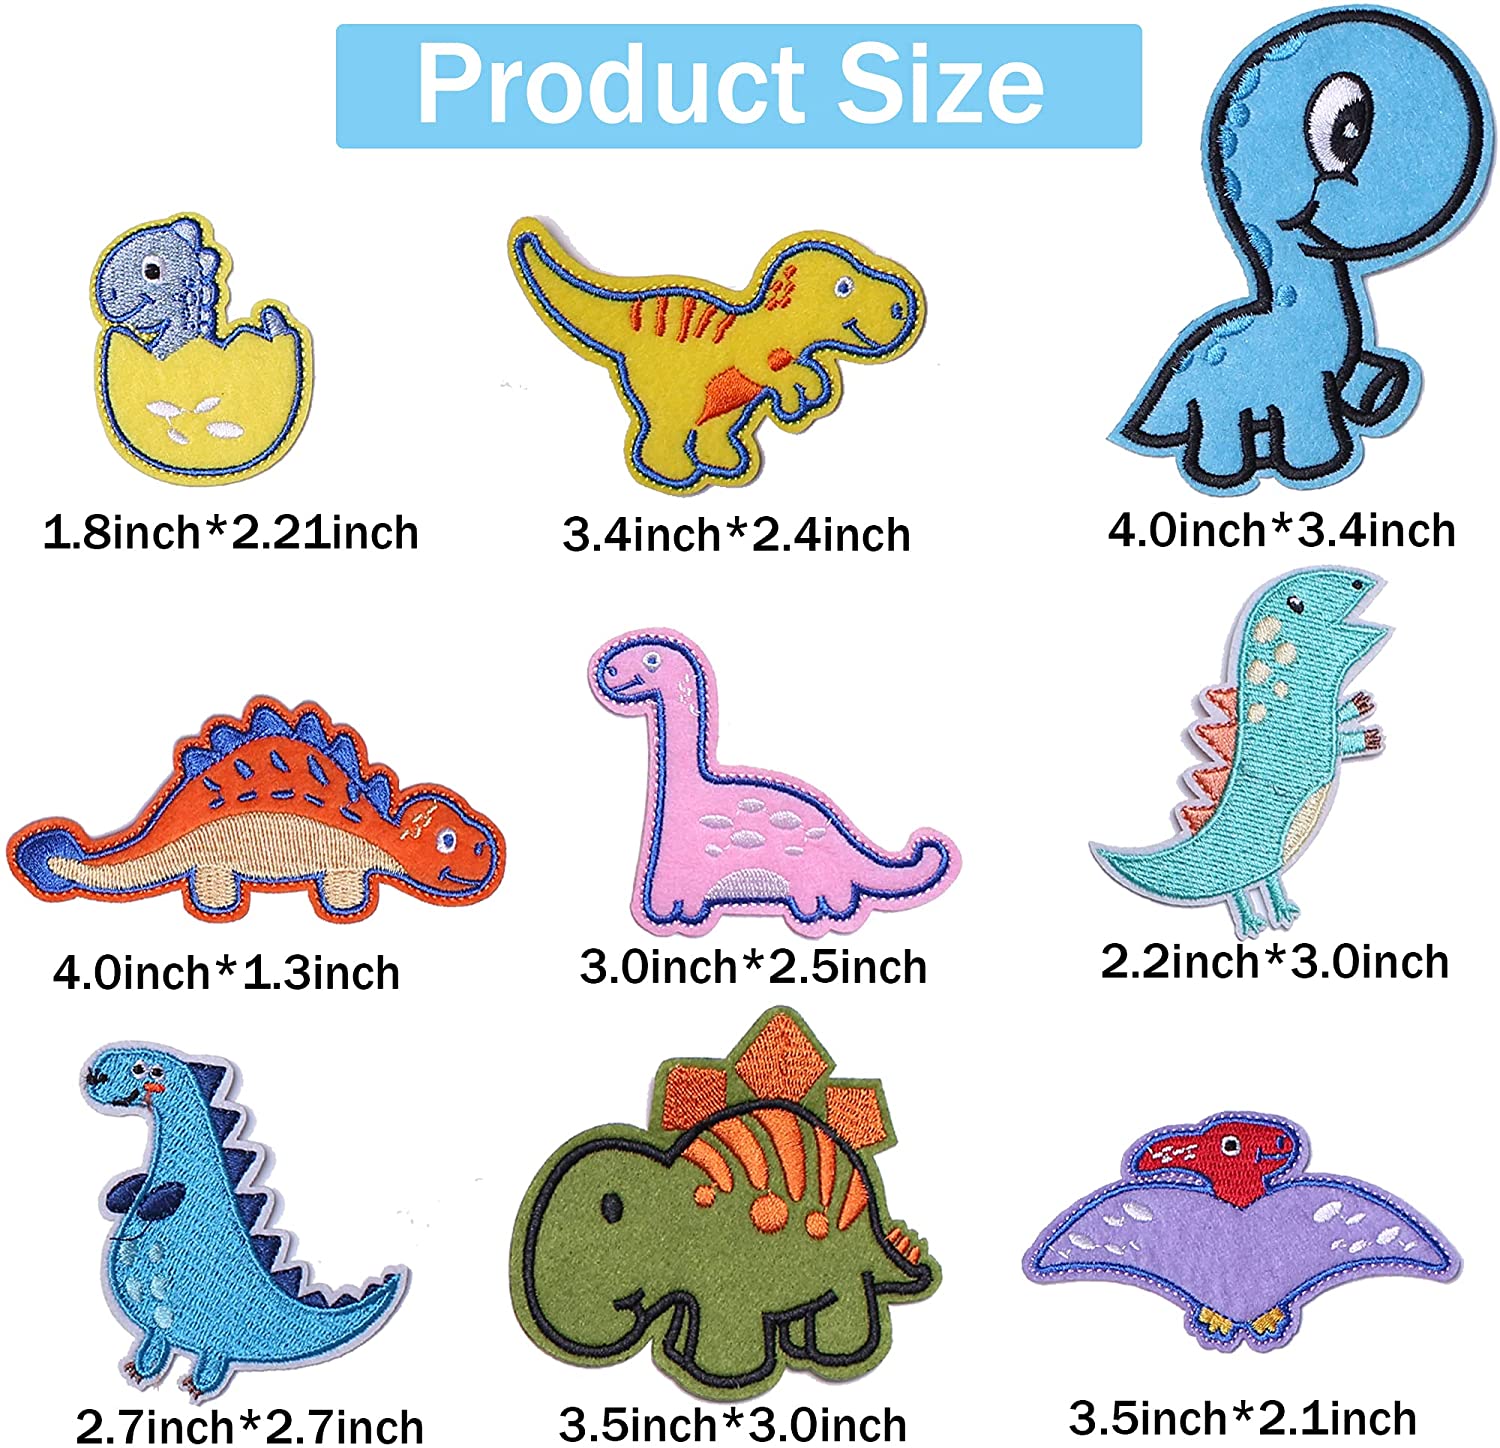 Cute Dinosaur Thermoadhesive Patch For Clothing Iron On Embroidery Sticker  For DIY Garments And Cute Sewing Notions From Moomoo2016, $0.32